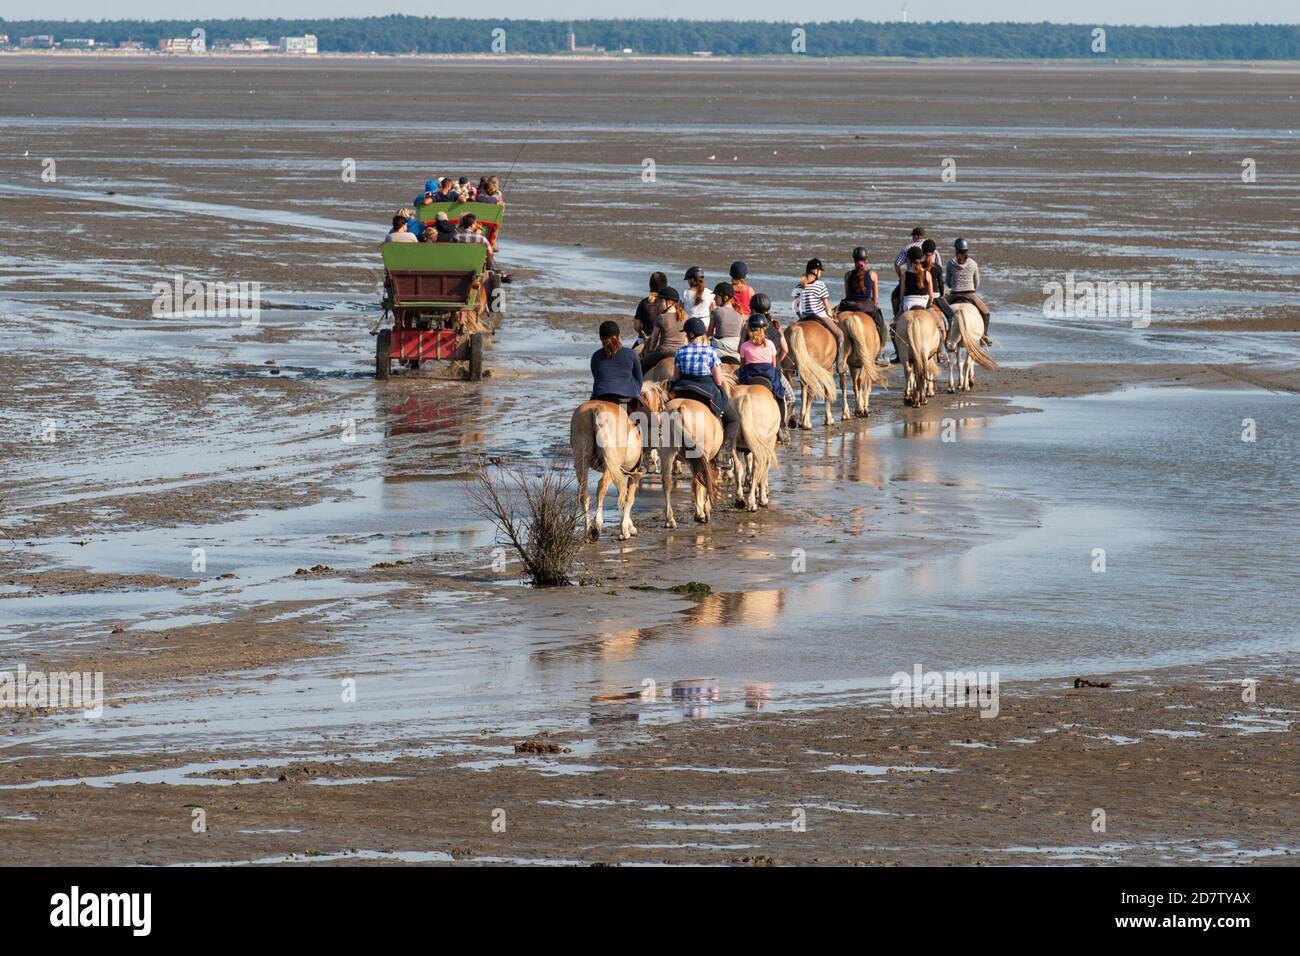 GERMANY, ISLAND NEUWERK, A group of young girls get ready to cross the wadden sea on horseback from the island of Neuwerk to the mainland Stock Photo